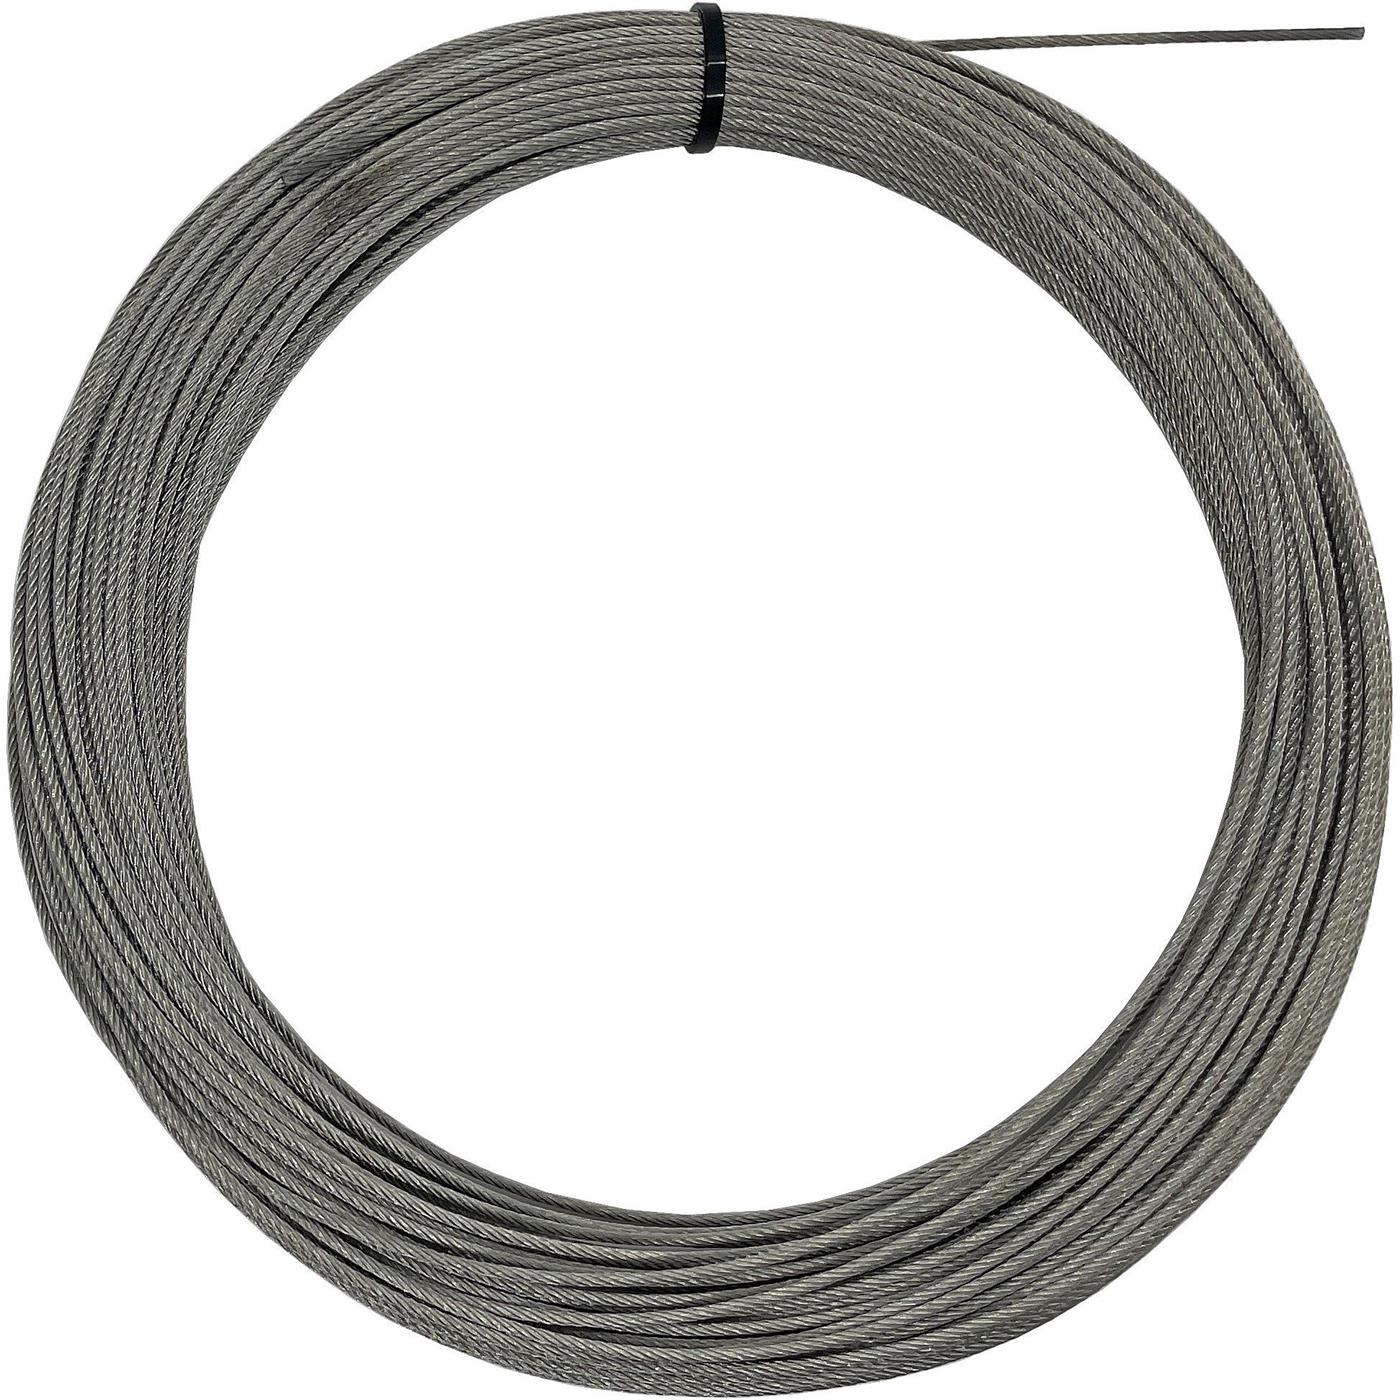 Wire rope 50m Stainless steel V4A 316 2mm 7x19 Ropes stainless for trellis systems